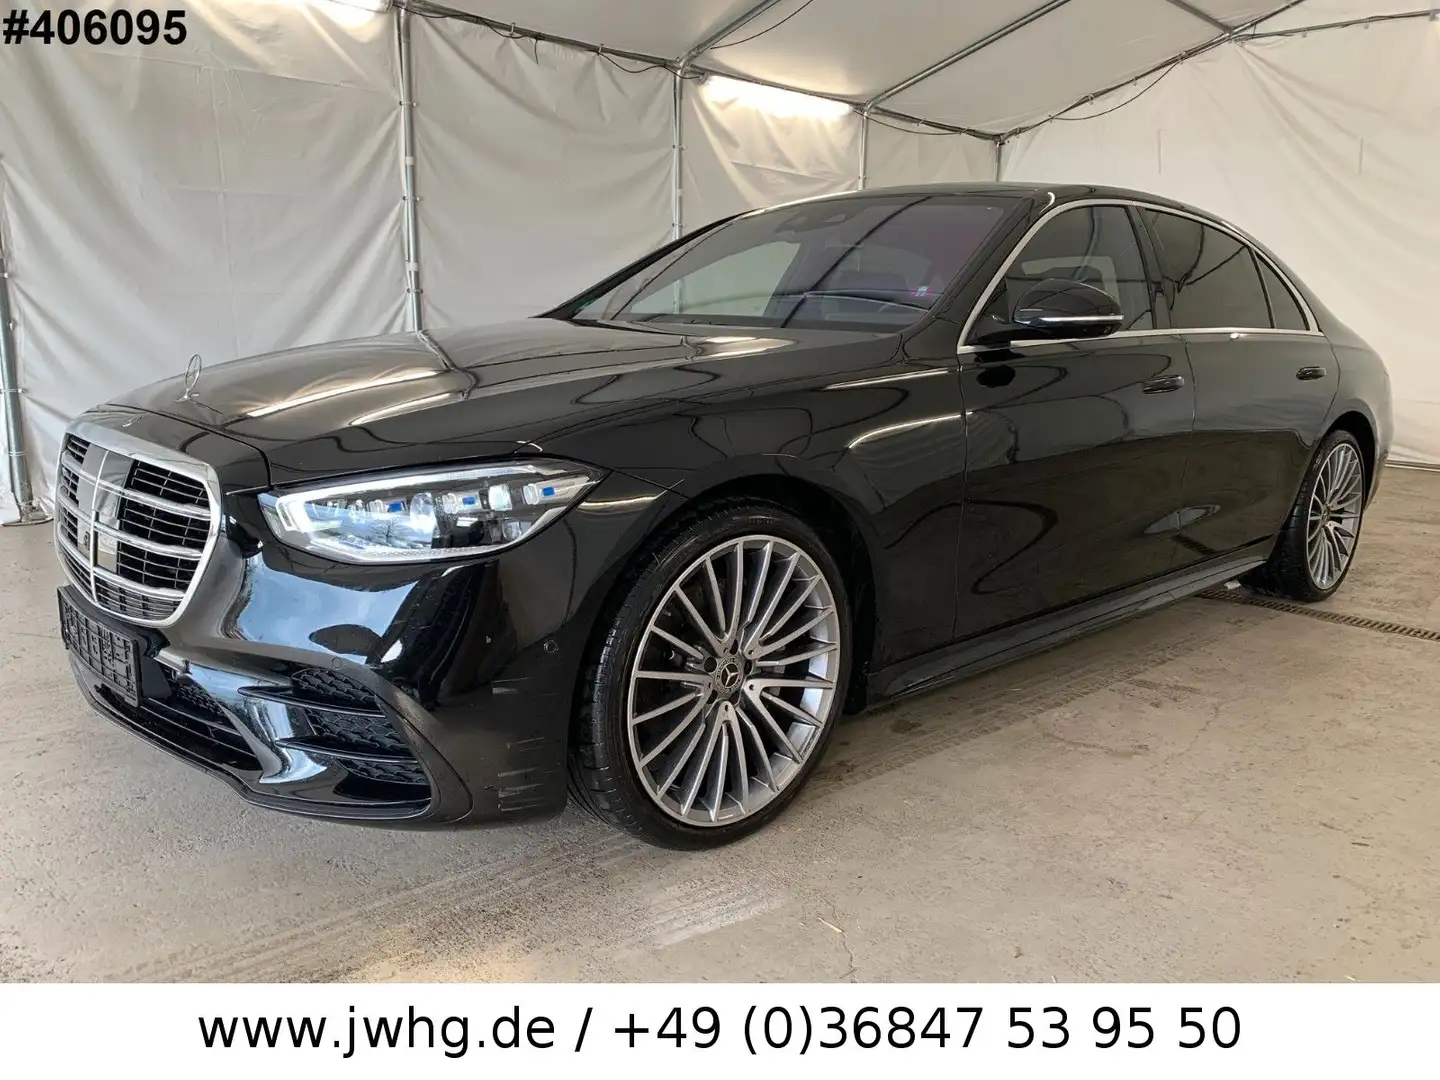 Mercedes-Benz S 580 S580Lang 4M AMG Line Voll UVP 170T€ Chauffer 21" crna - 1